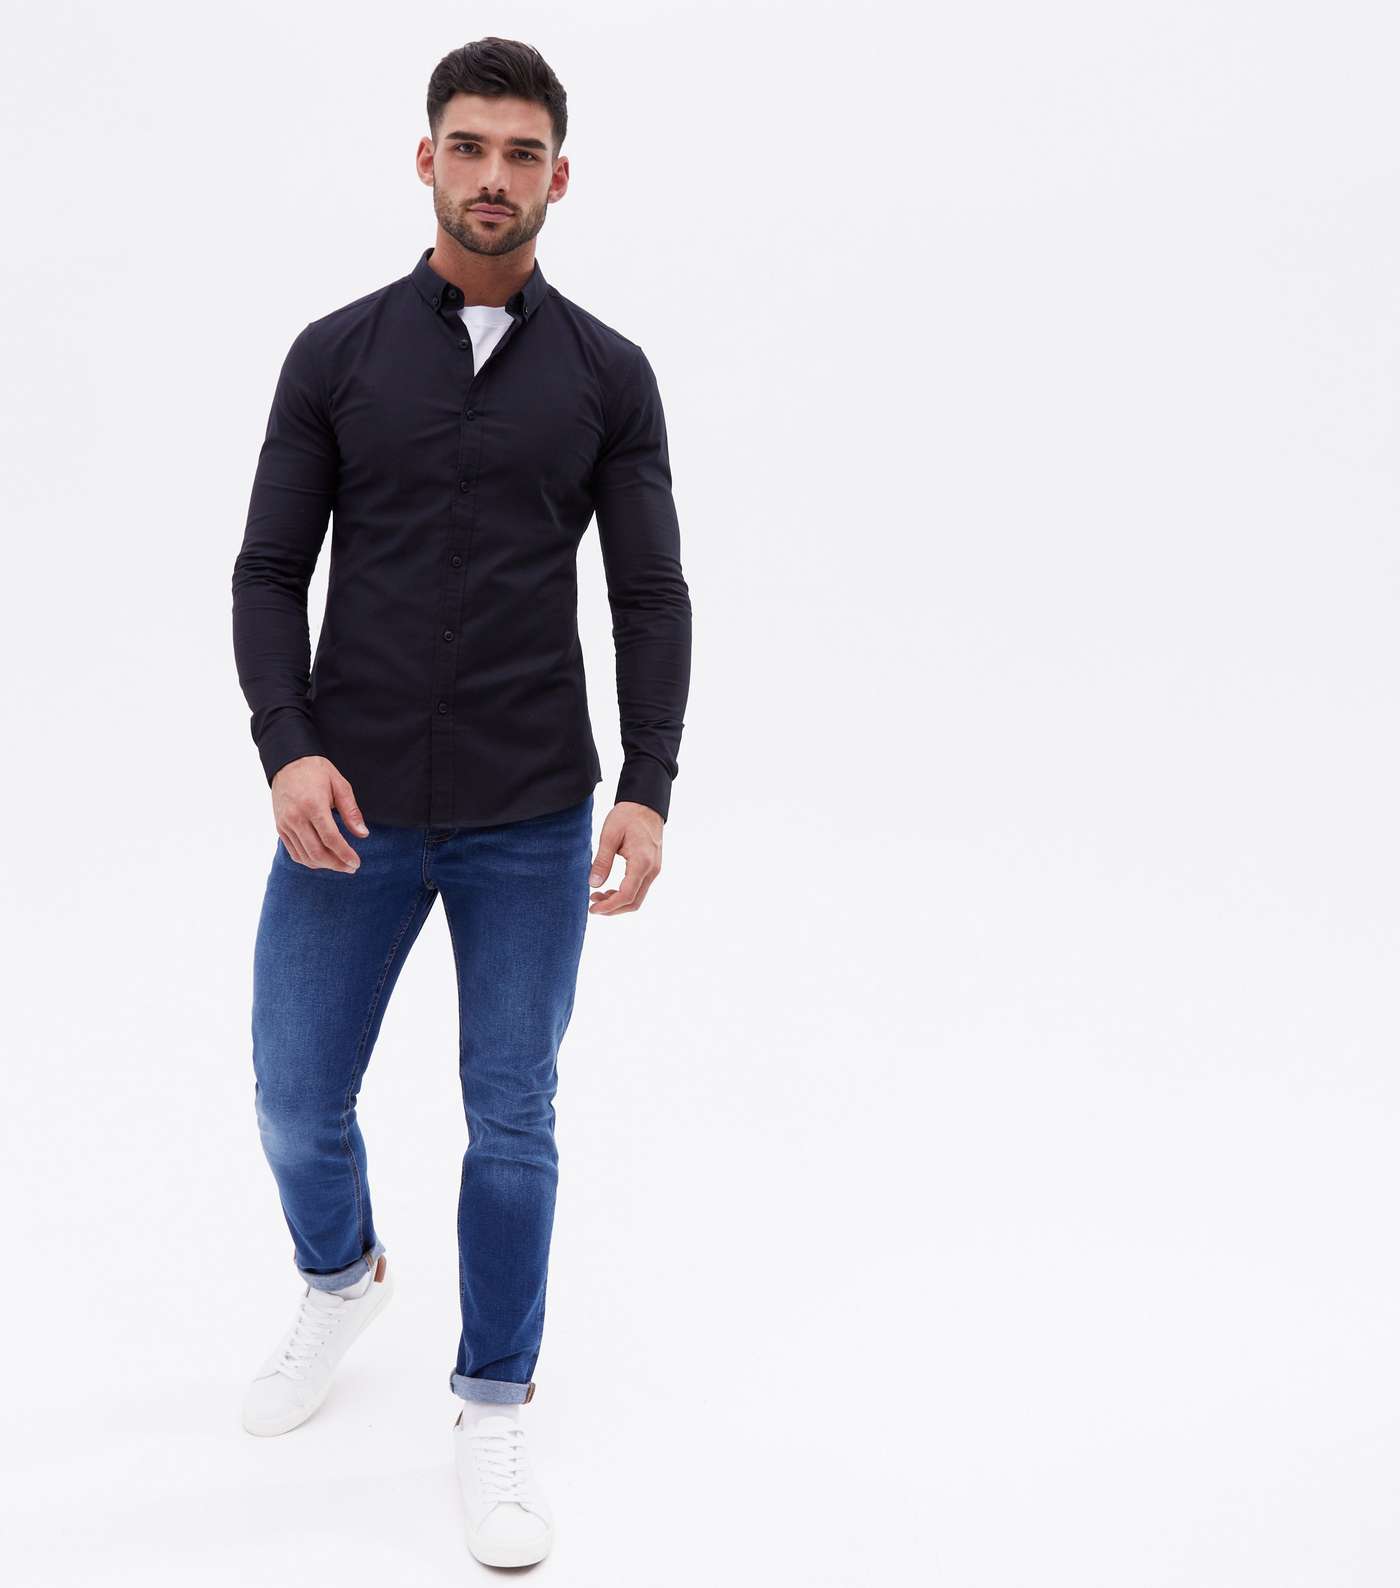 Black Muscle Fit Long Sleeve Oxford Shirt Image 2